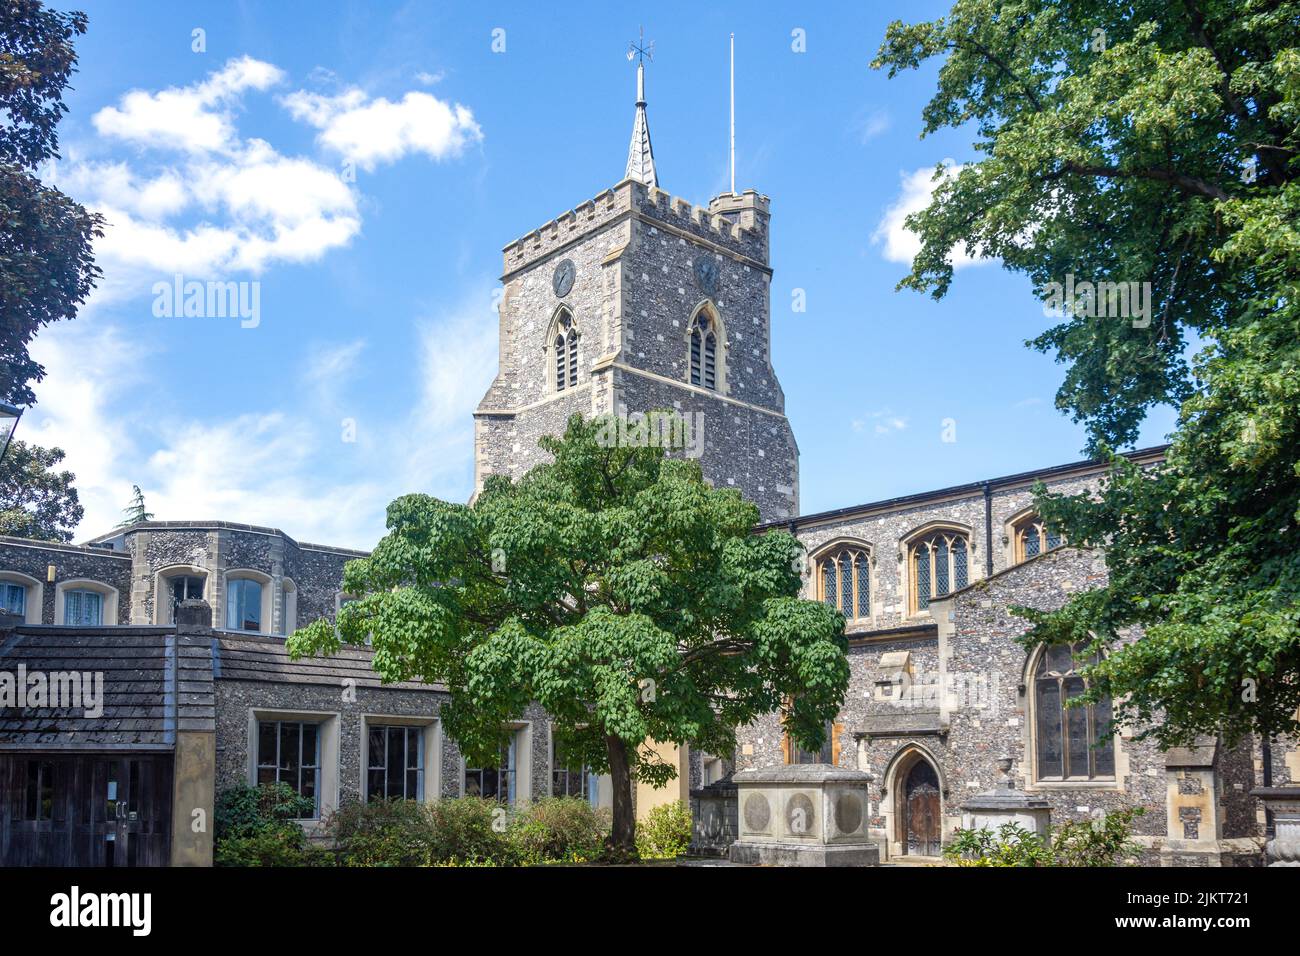 Eglise paroissiale St Mary, Church Street, Watford, Hertfordshire, Angleterre, Royaume-Uni Banque D'Images